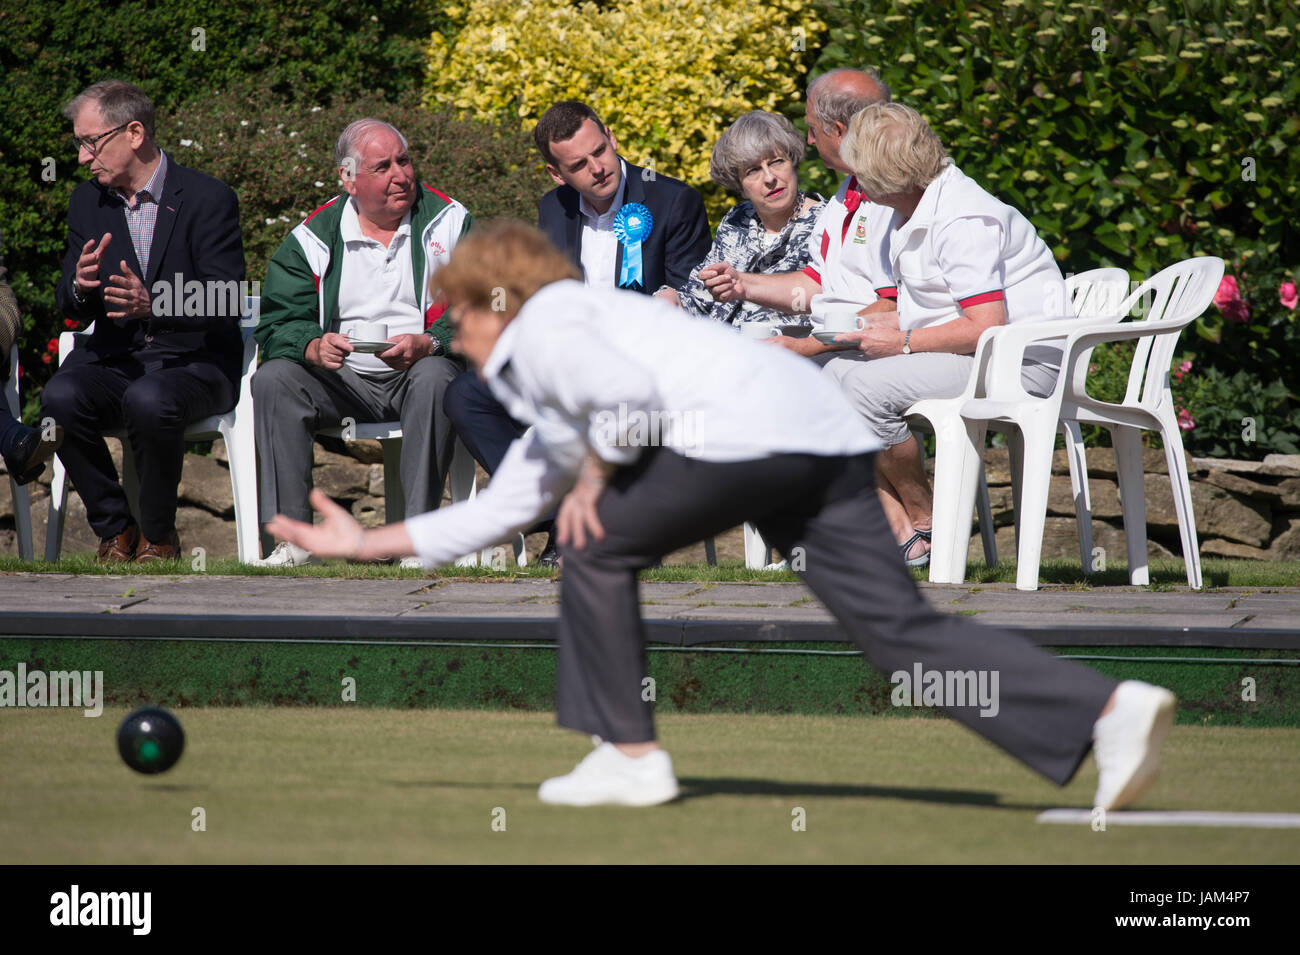 Prime Minister Theresa May (thrid right) visits Atherley Bowling Club in Southampton, with her husband Philip (left) while on the General Election campaign trail. Stock Photo